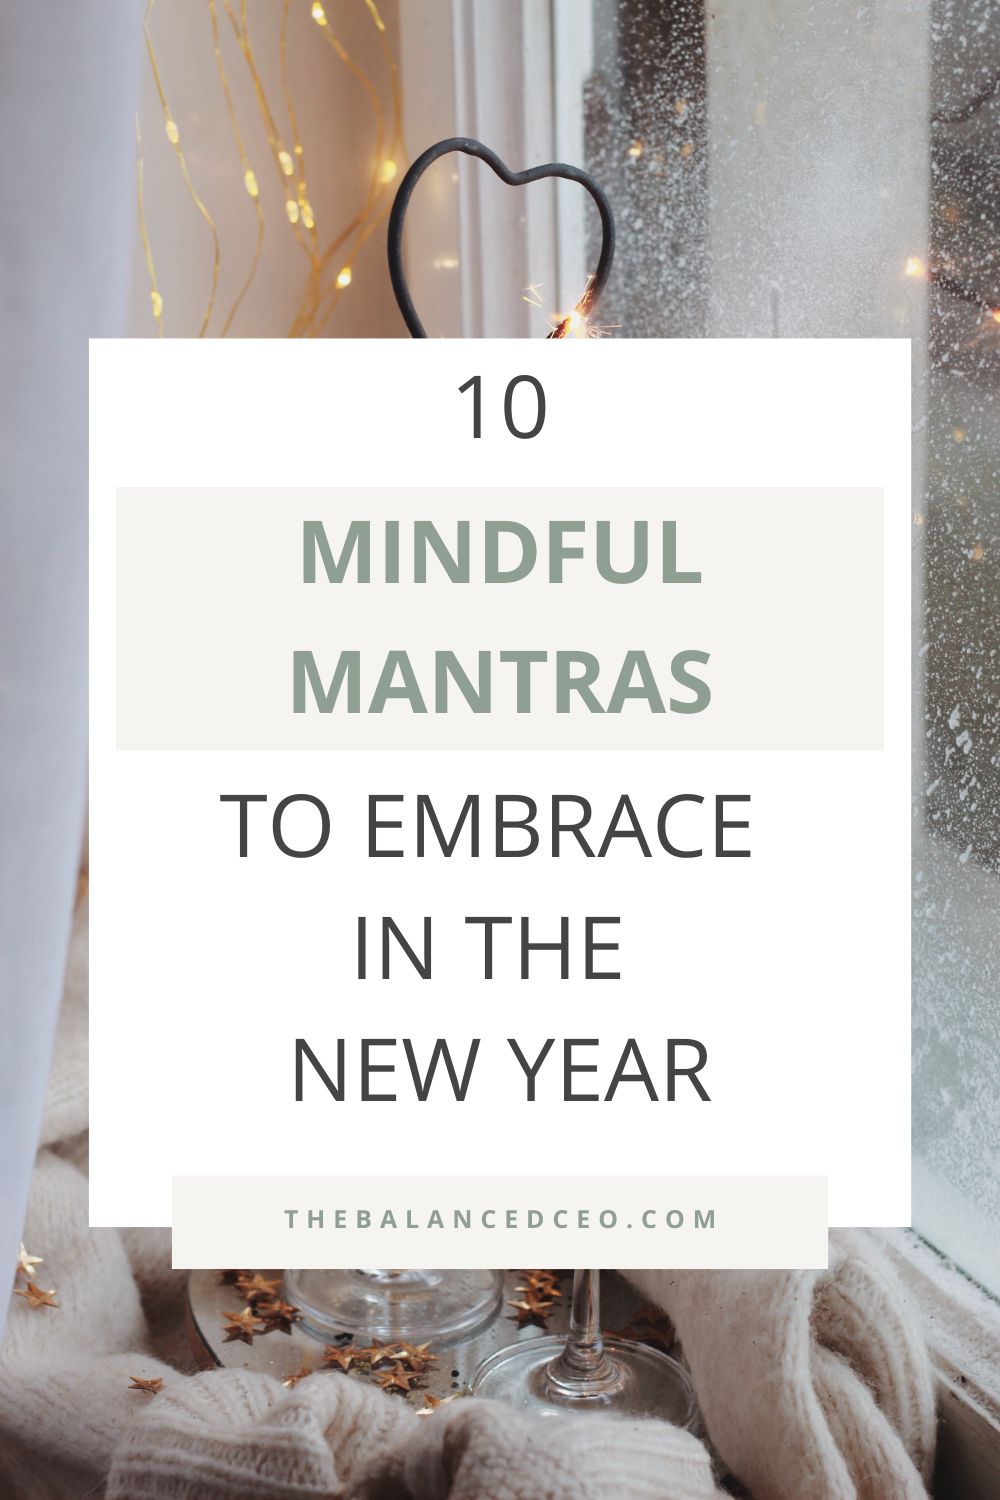 10 Mindful Mantras to Embrace in the New Year